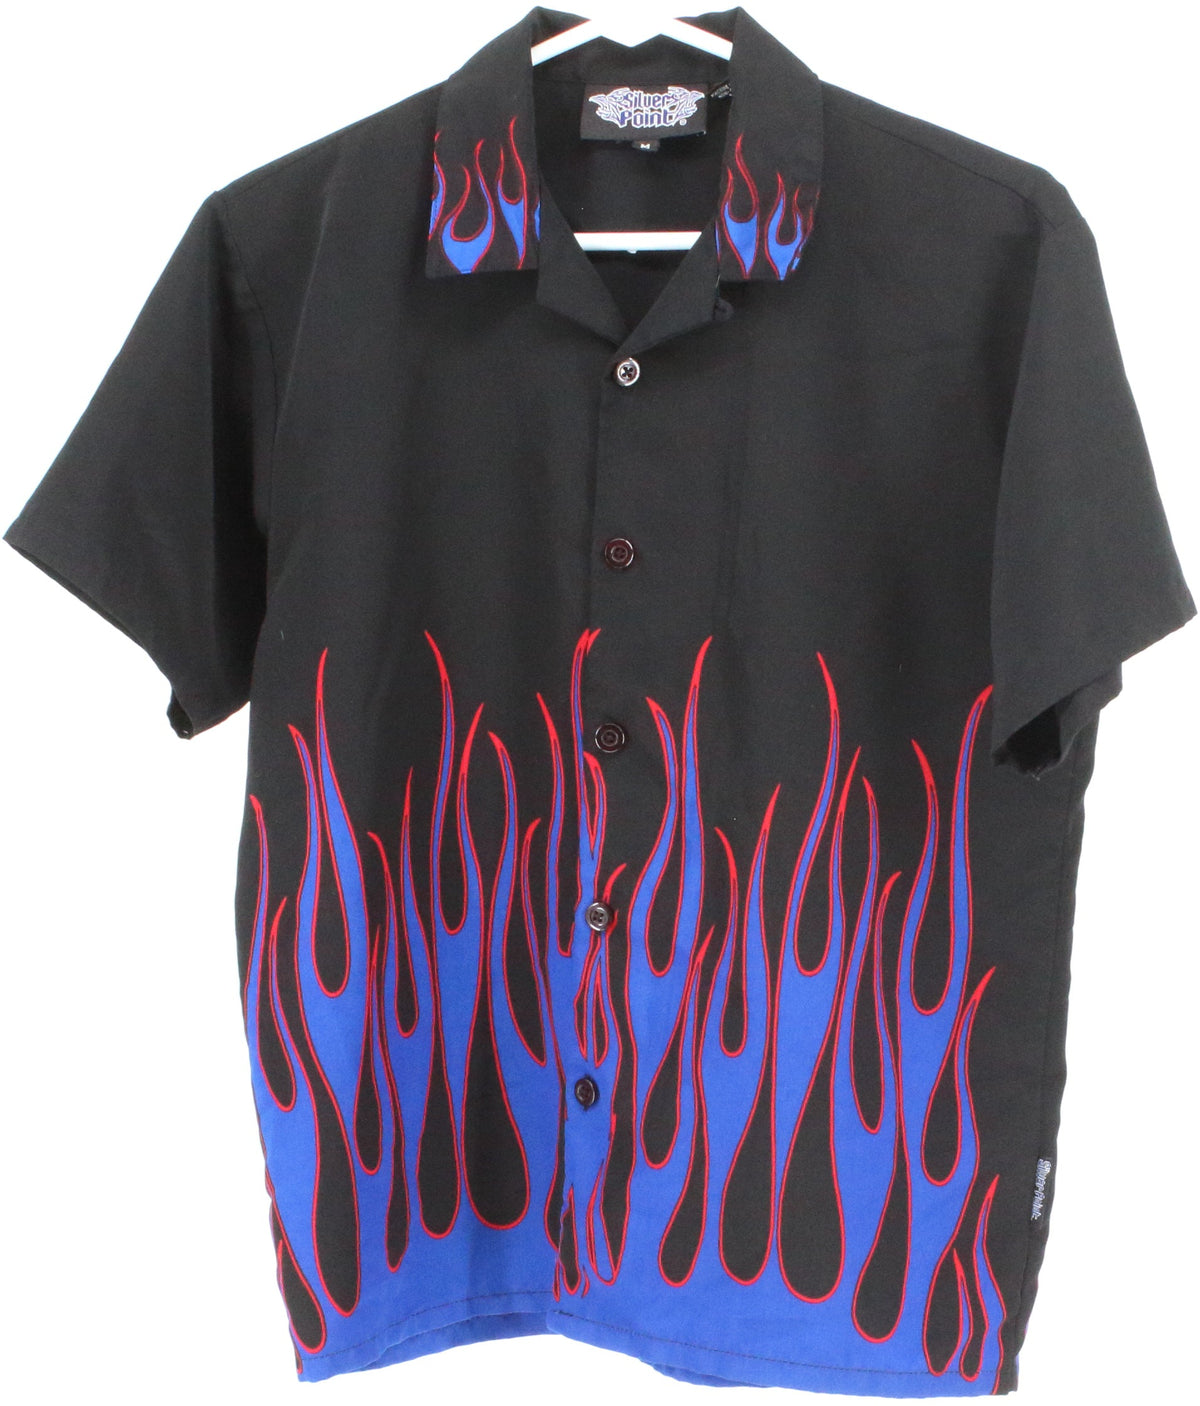 Silver Point Black Short Sleeve Shirt With Blue Fire Print